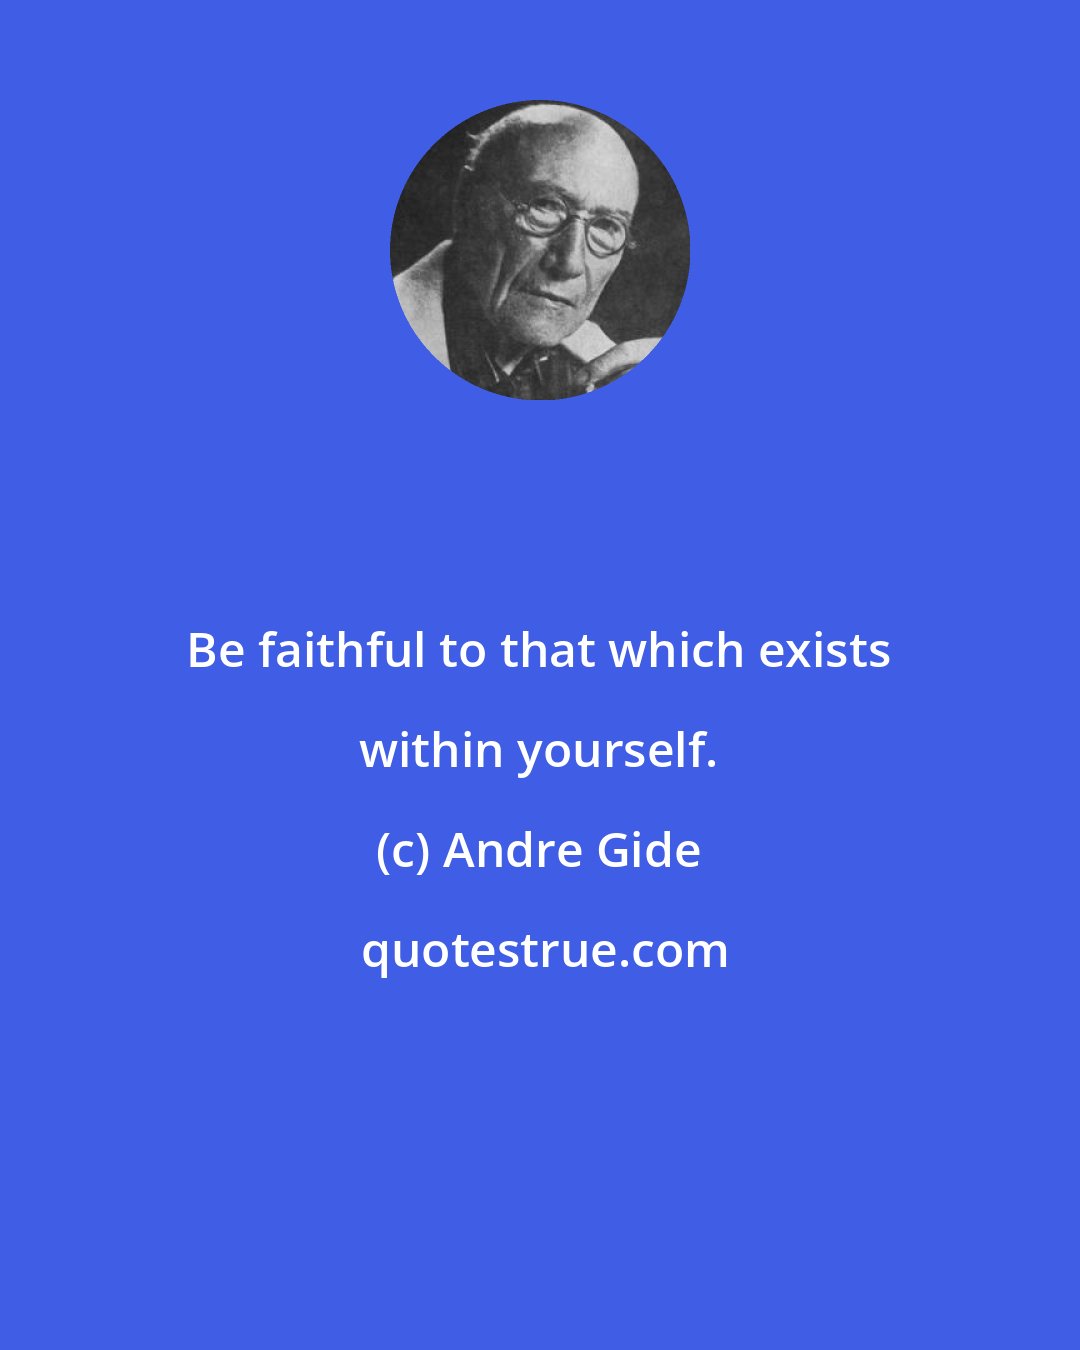 Andre Gide: Be faithful to that which exists within yourself.